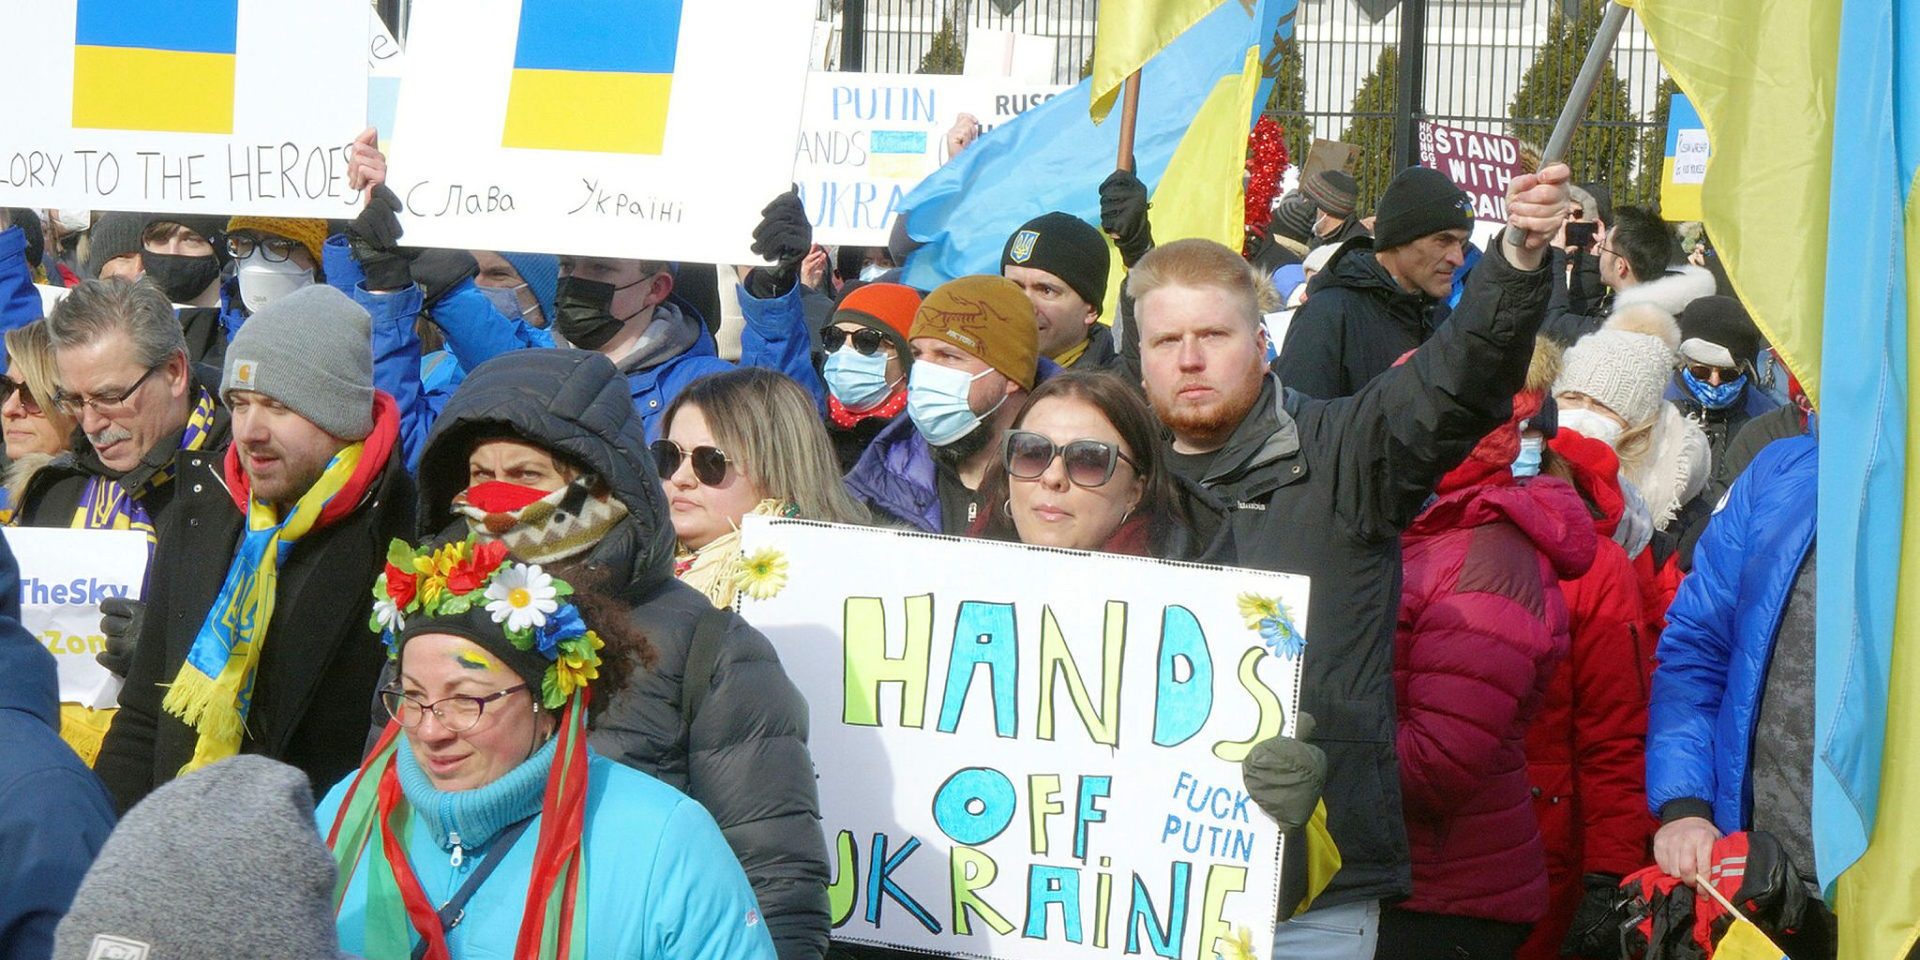 A rally in support of Ukraine takes place in front of the Russian Embassy in Ottawa on Feb. 27, 2022. The Ukrainian Canadian Congress is hosting events in Ottawa on Feb. 24 to mark the one-year anniversary of the invasion. The Hill Times photograph by Sam Garcia